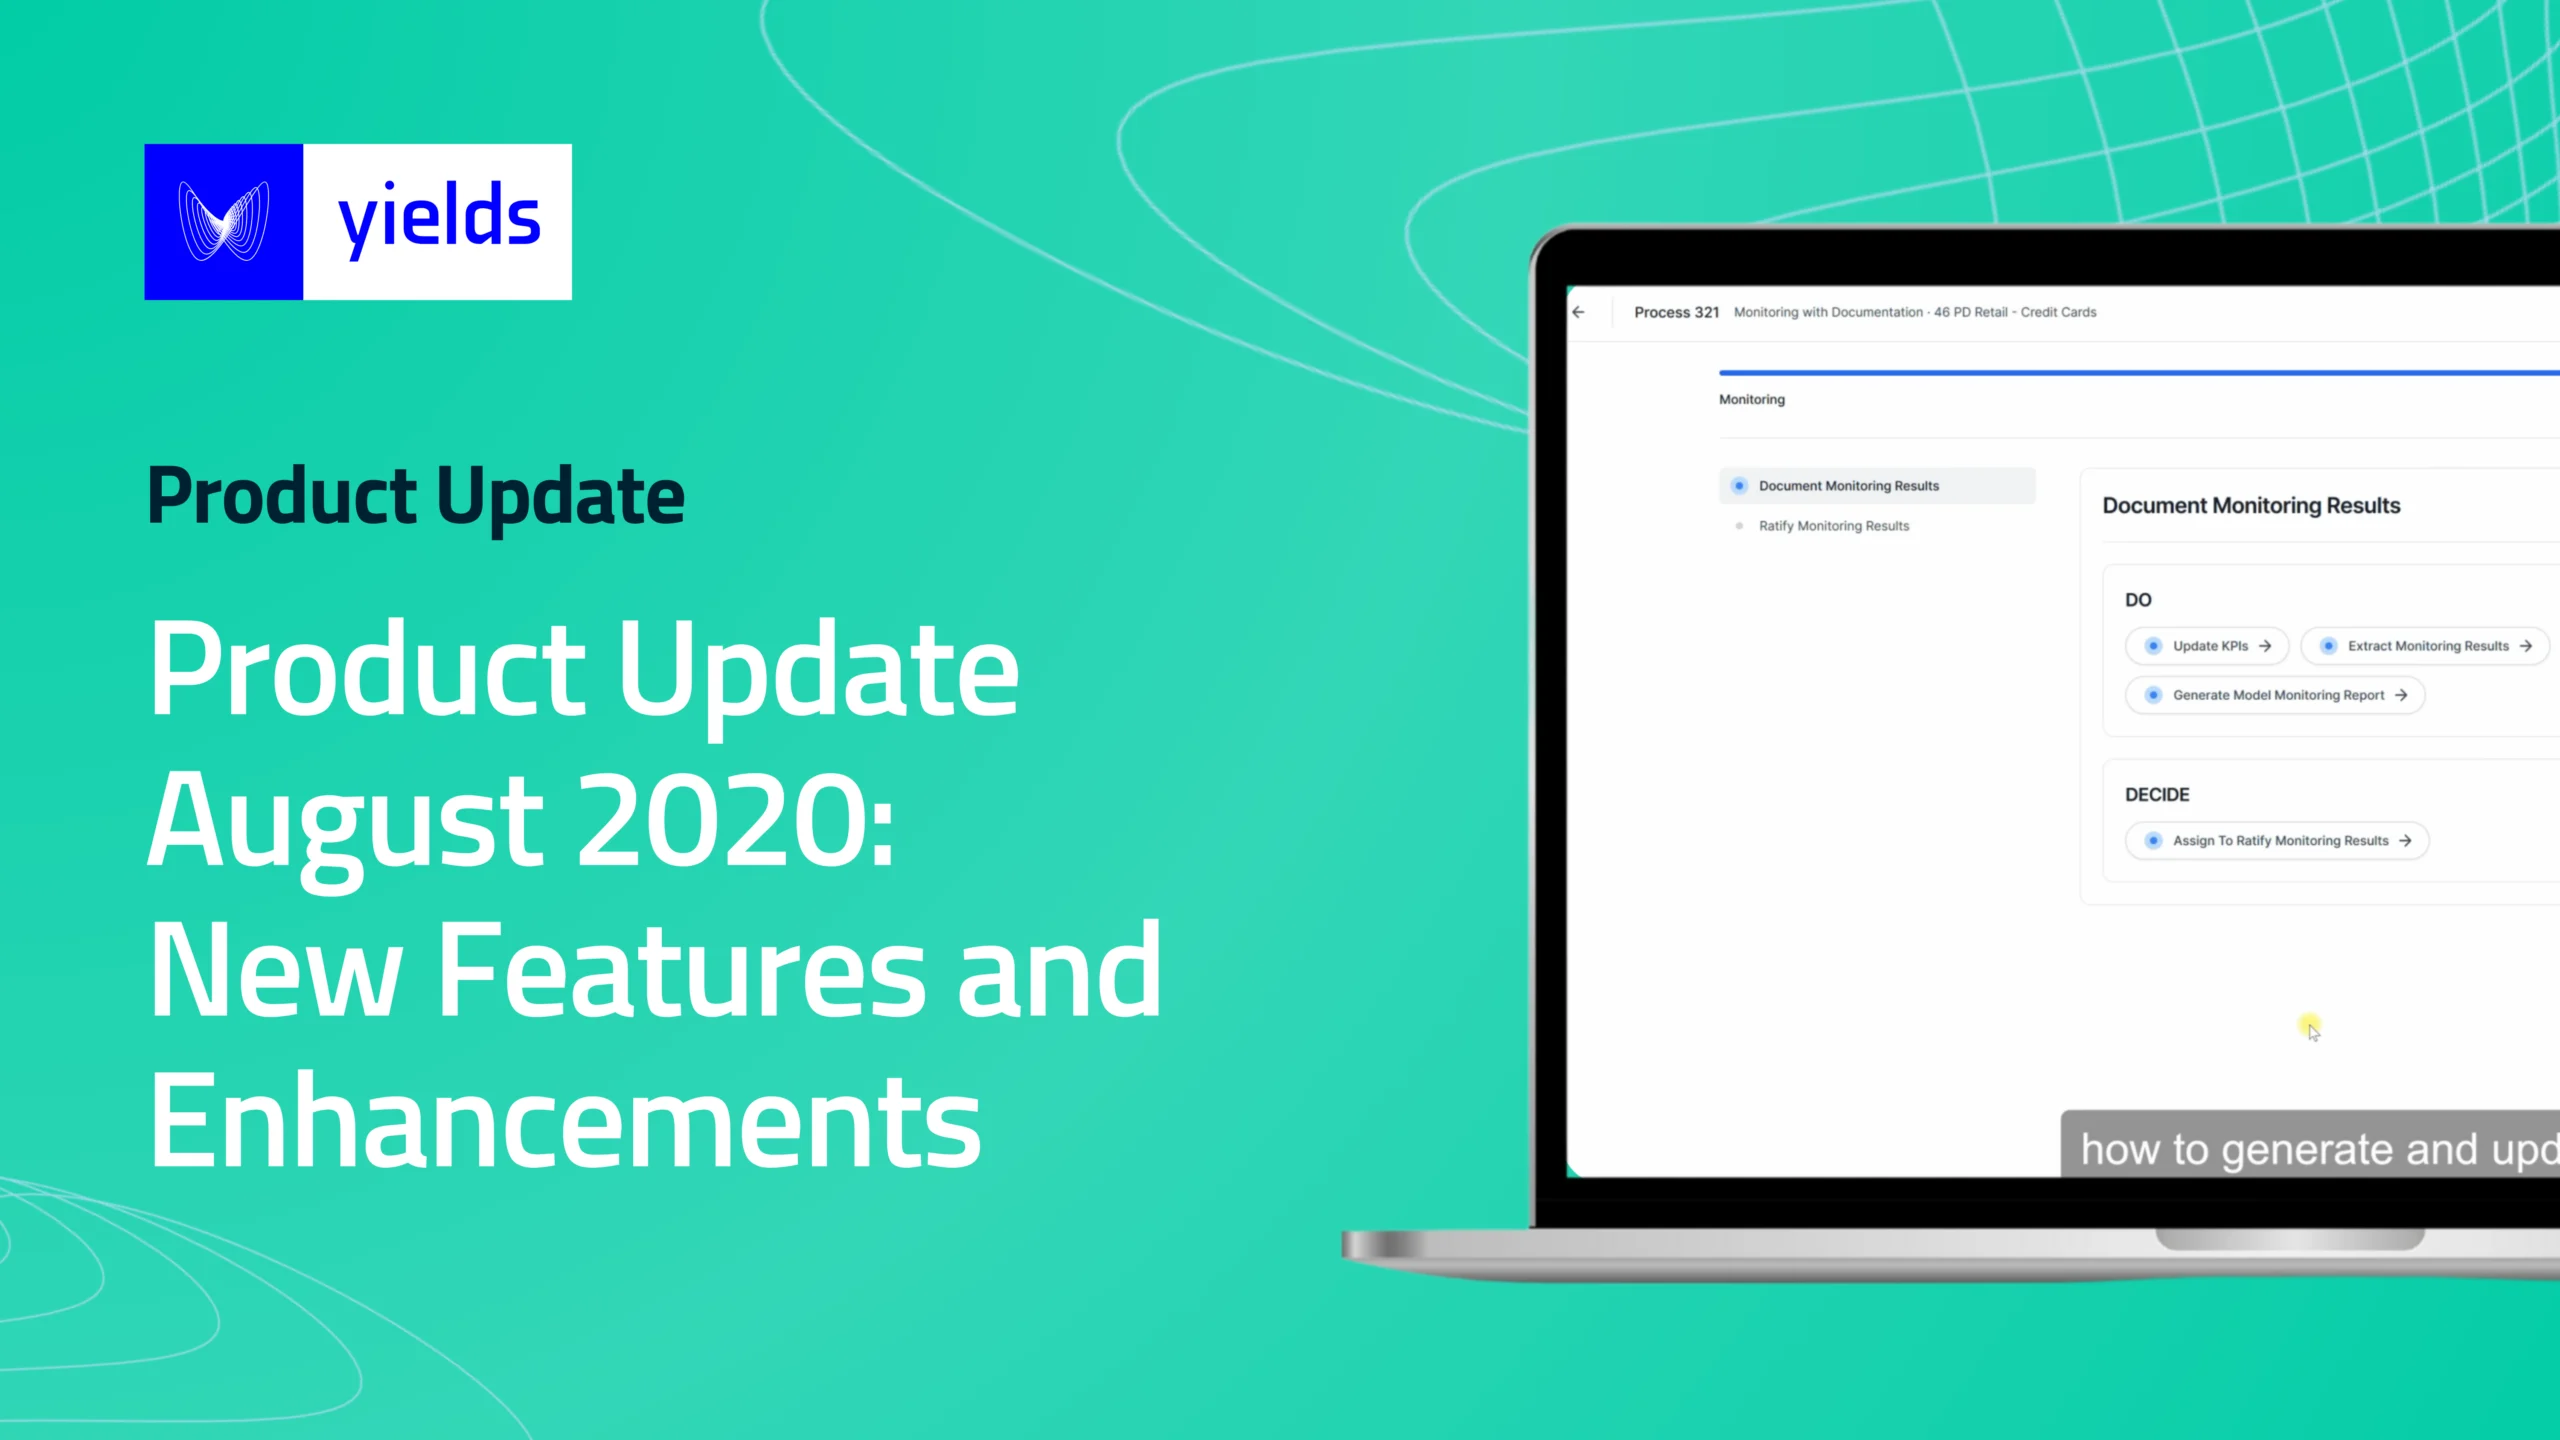 Product Update August 2020: New Features and Enhancements